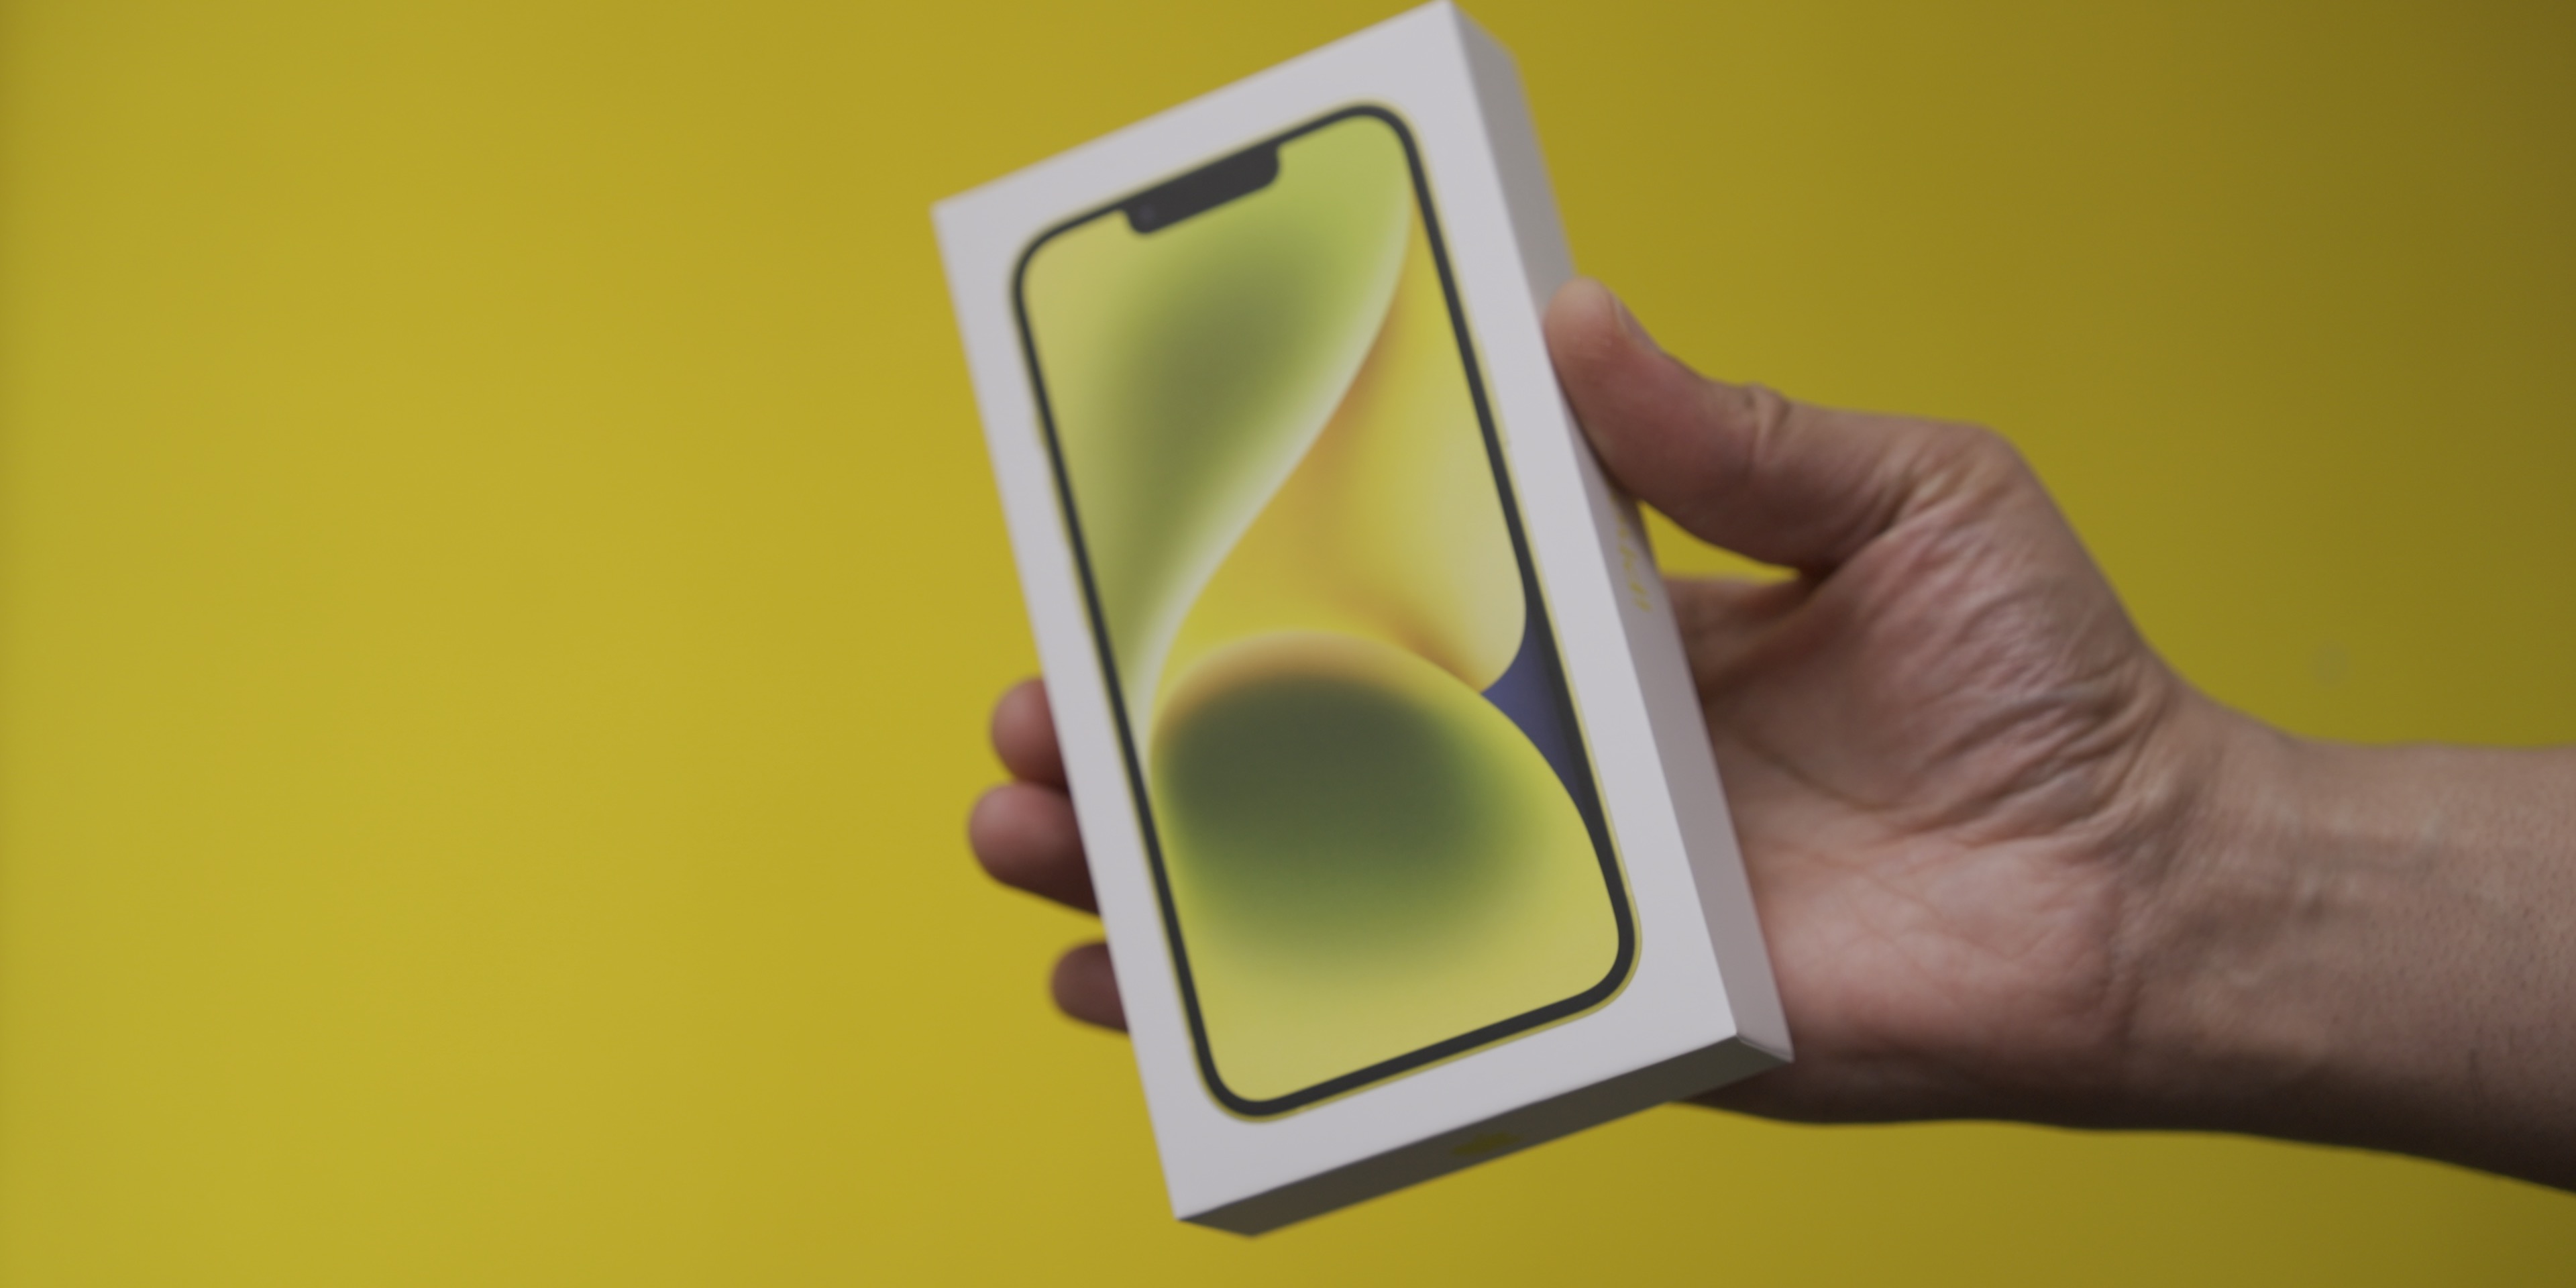 Download the new yellow iPhone 14 wallpaper right here